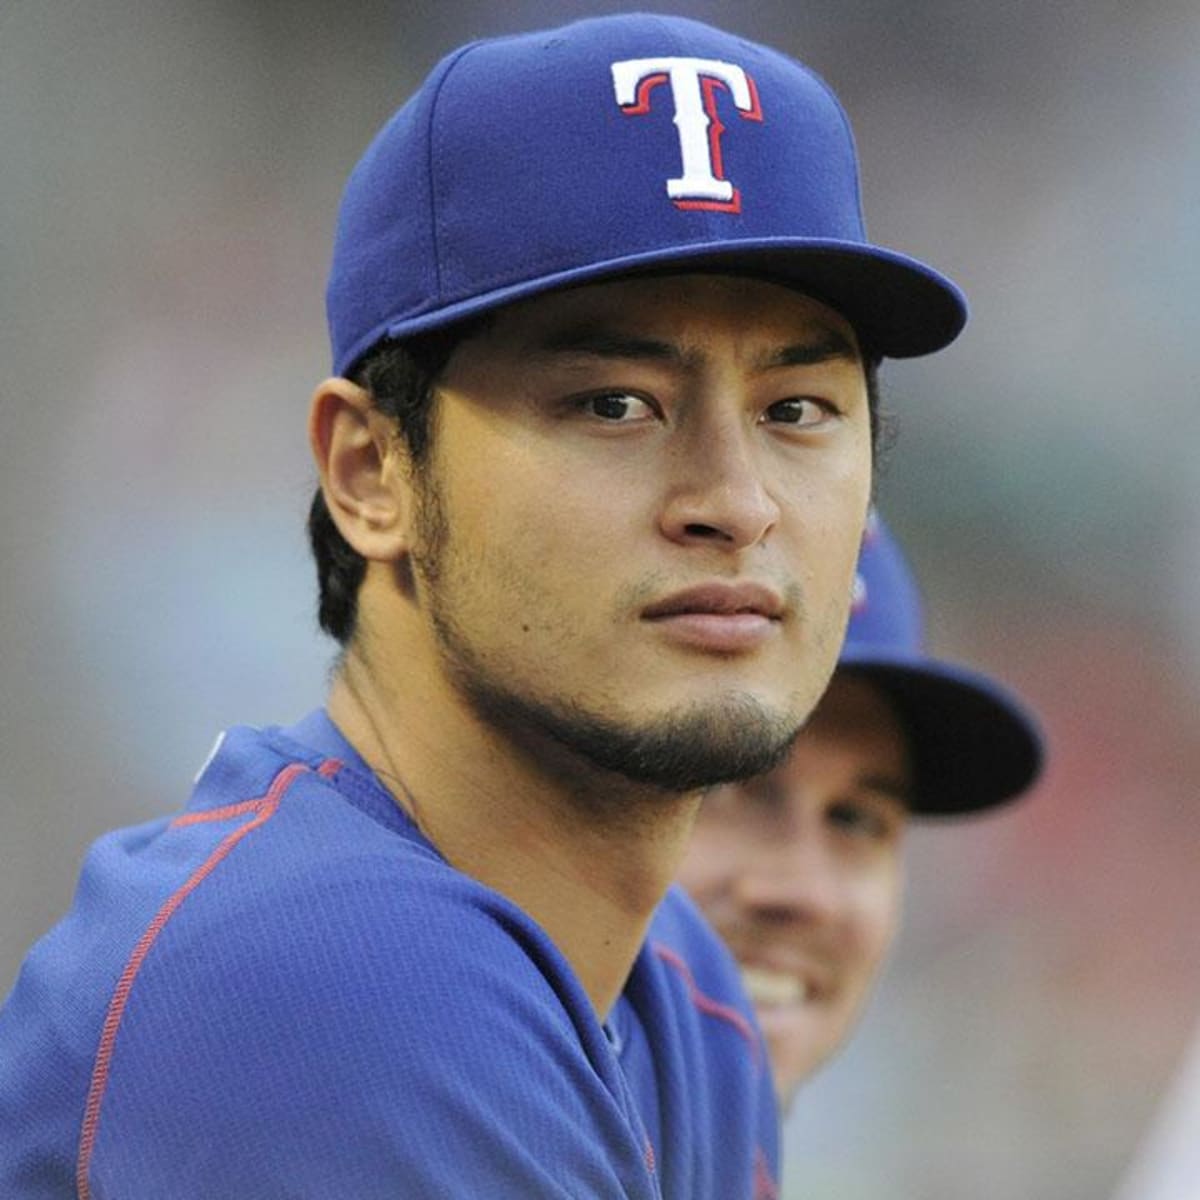 Rangers pitcher Yu Darvish comes within 1 out of Perfect Game (With Video)  – Delco Times